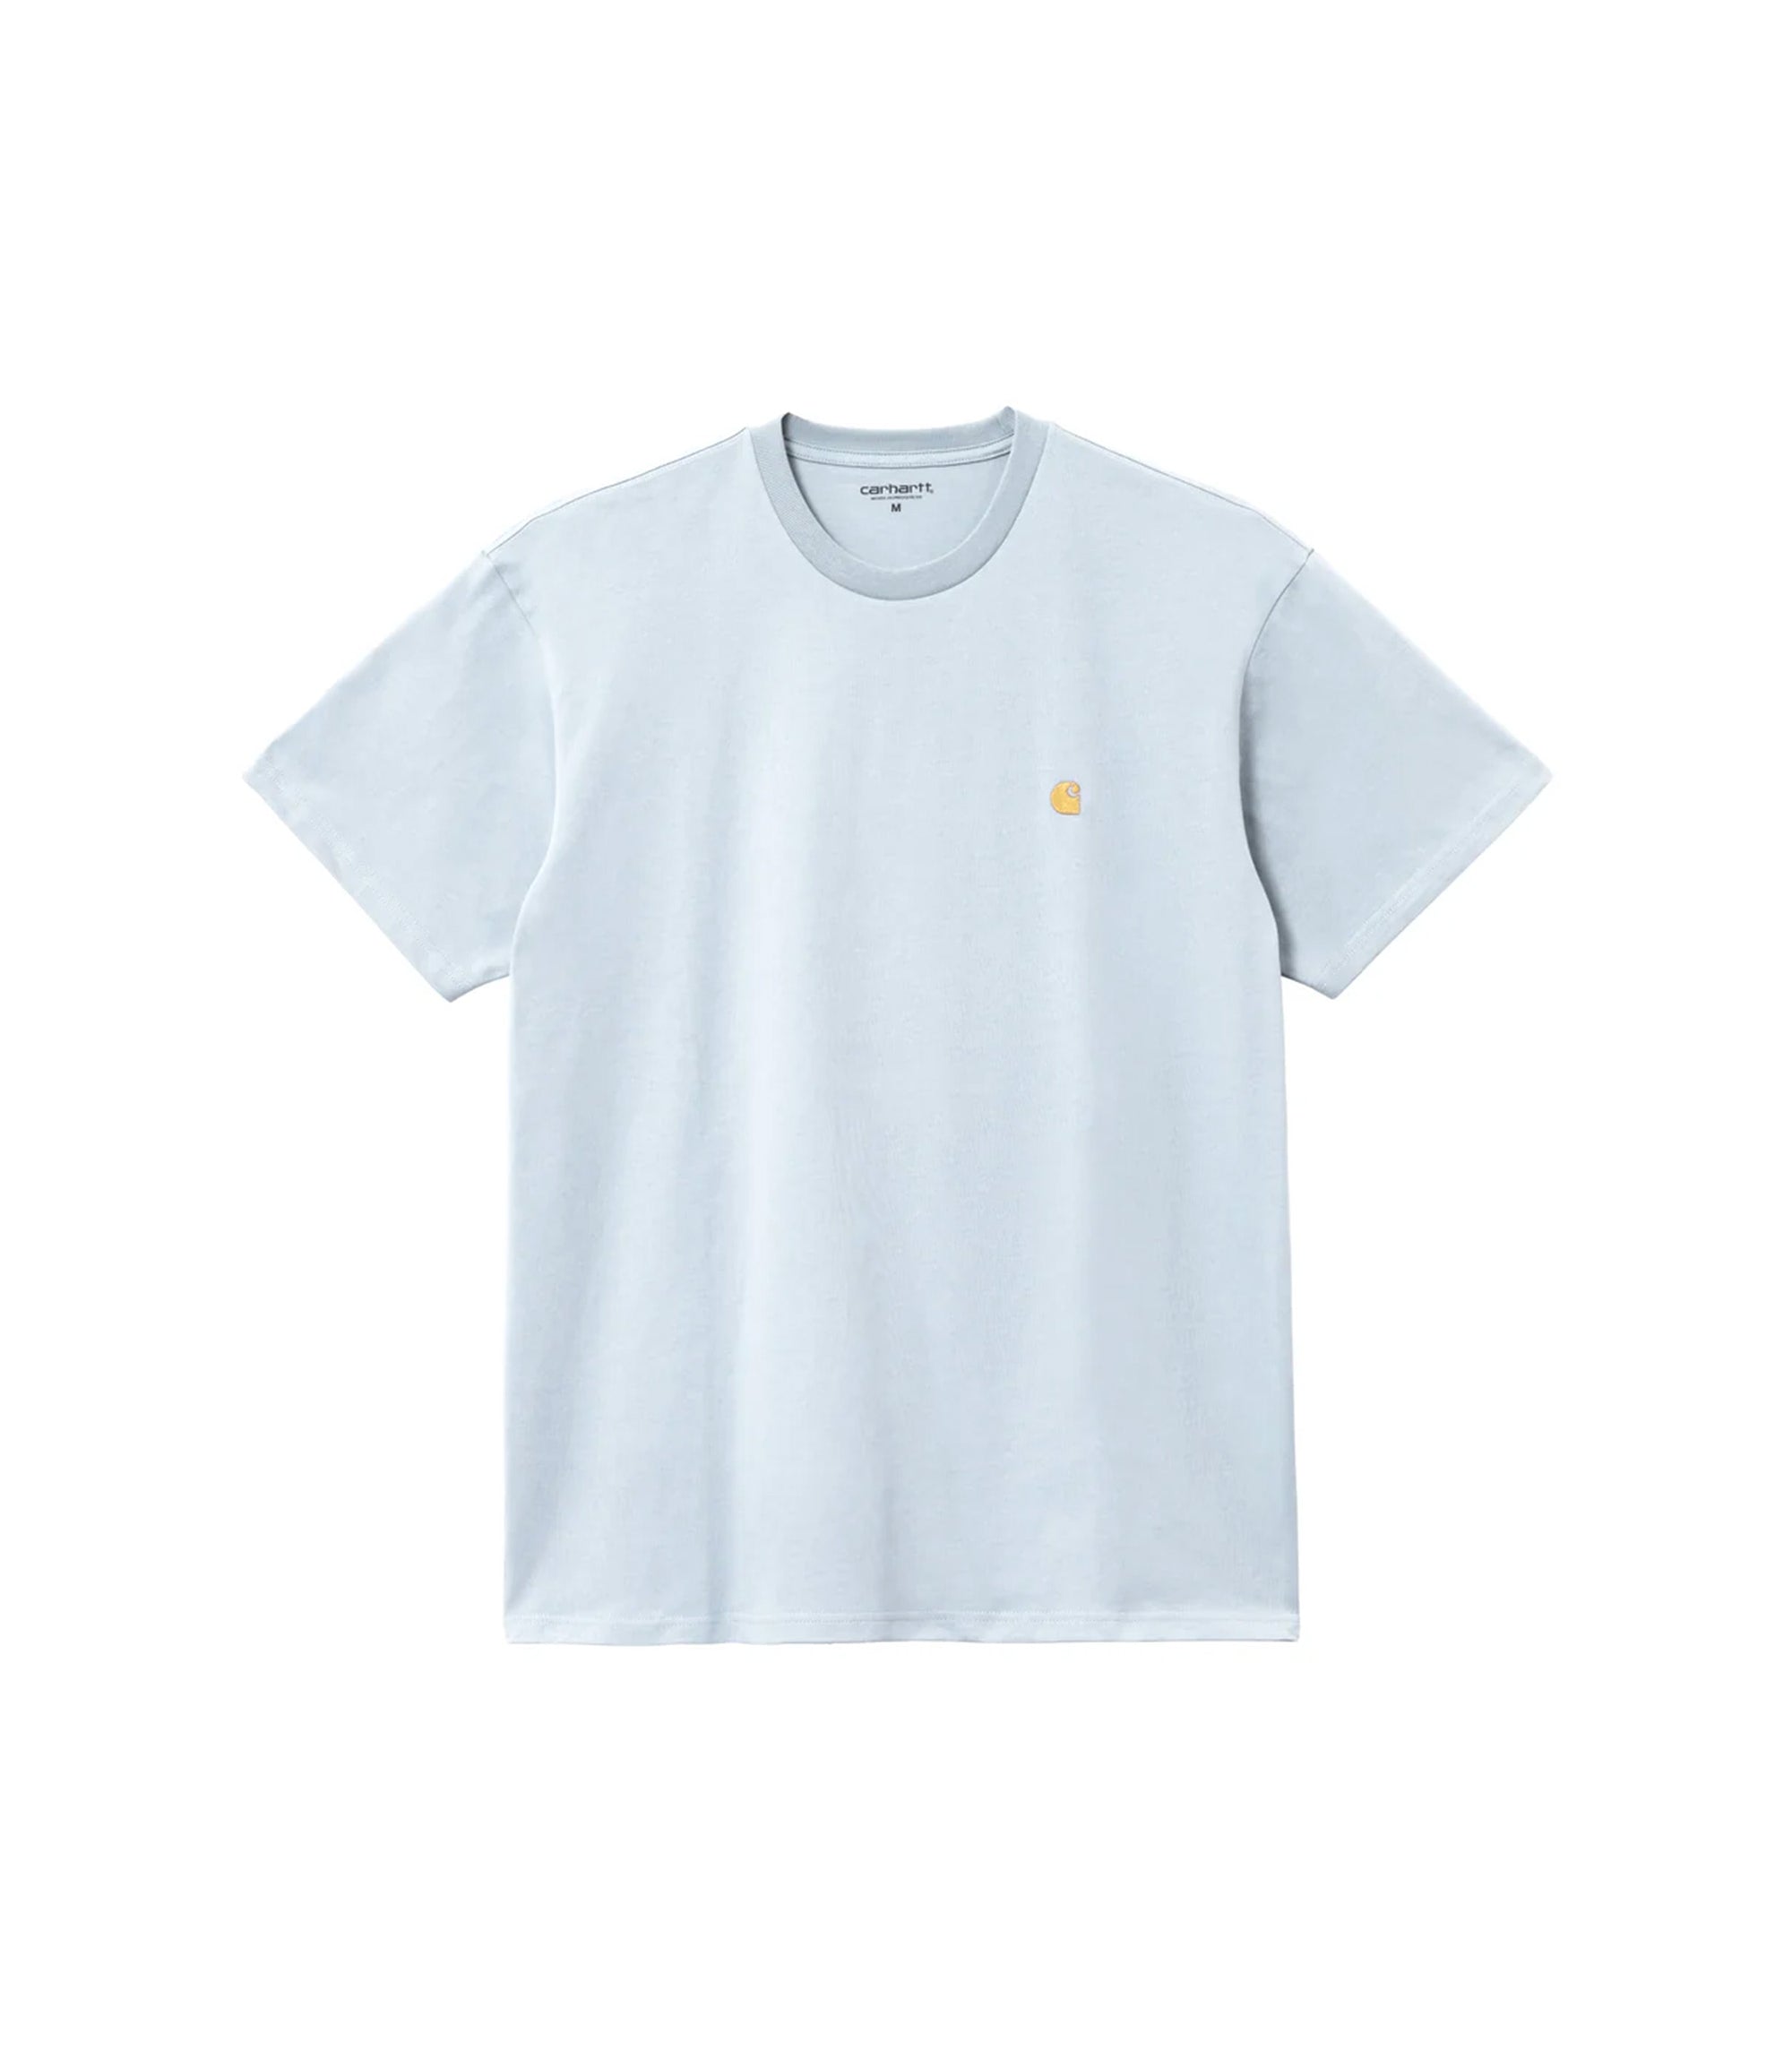 S/S Chase Shirt - Icarus / Gold